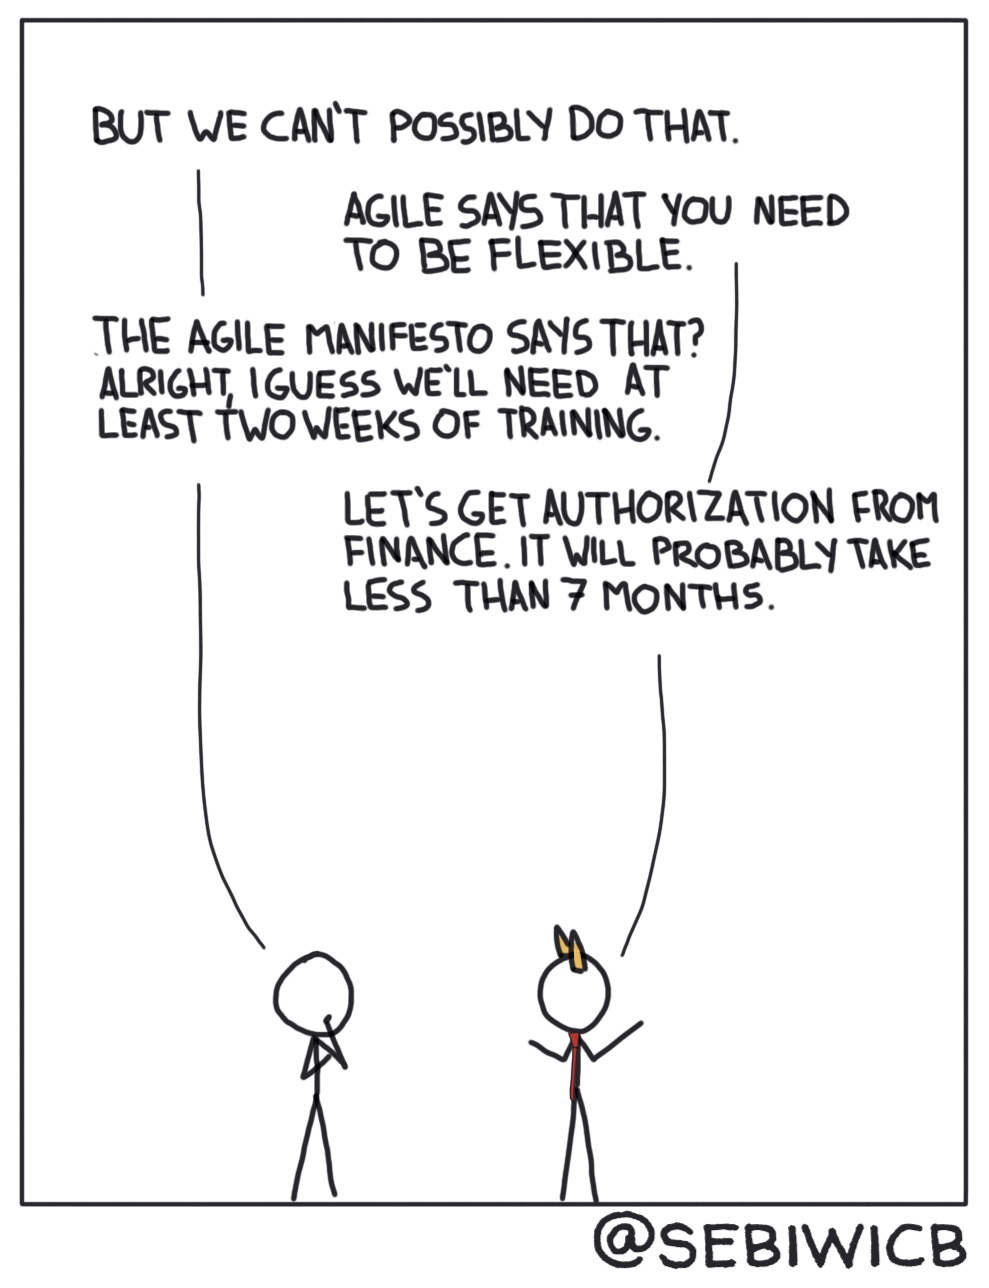 It's funny to hear people say "Agile says". It's like there are rules to follow.